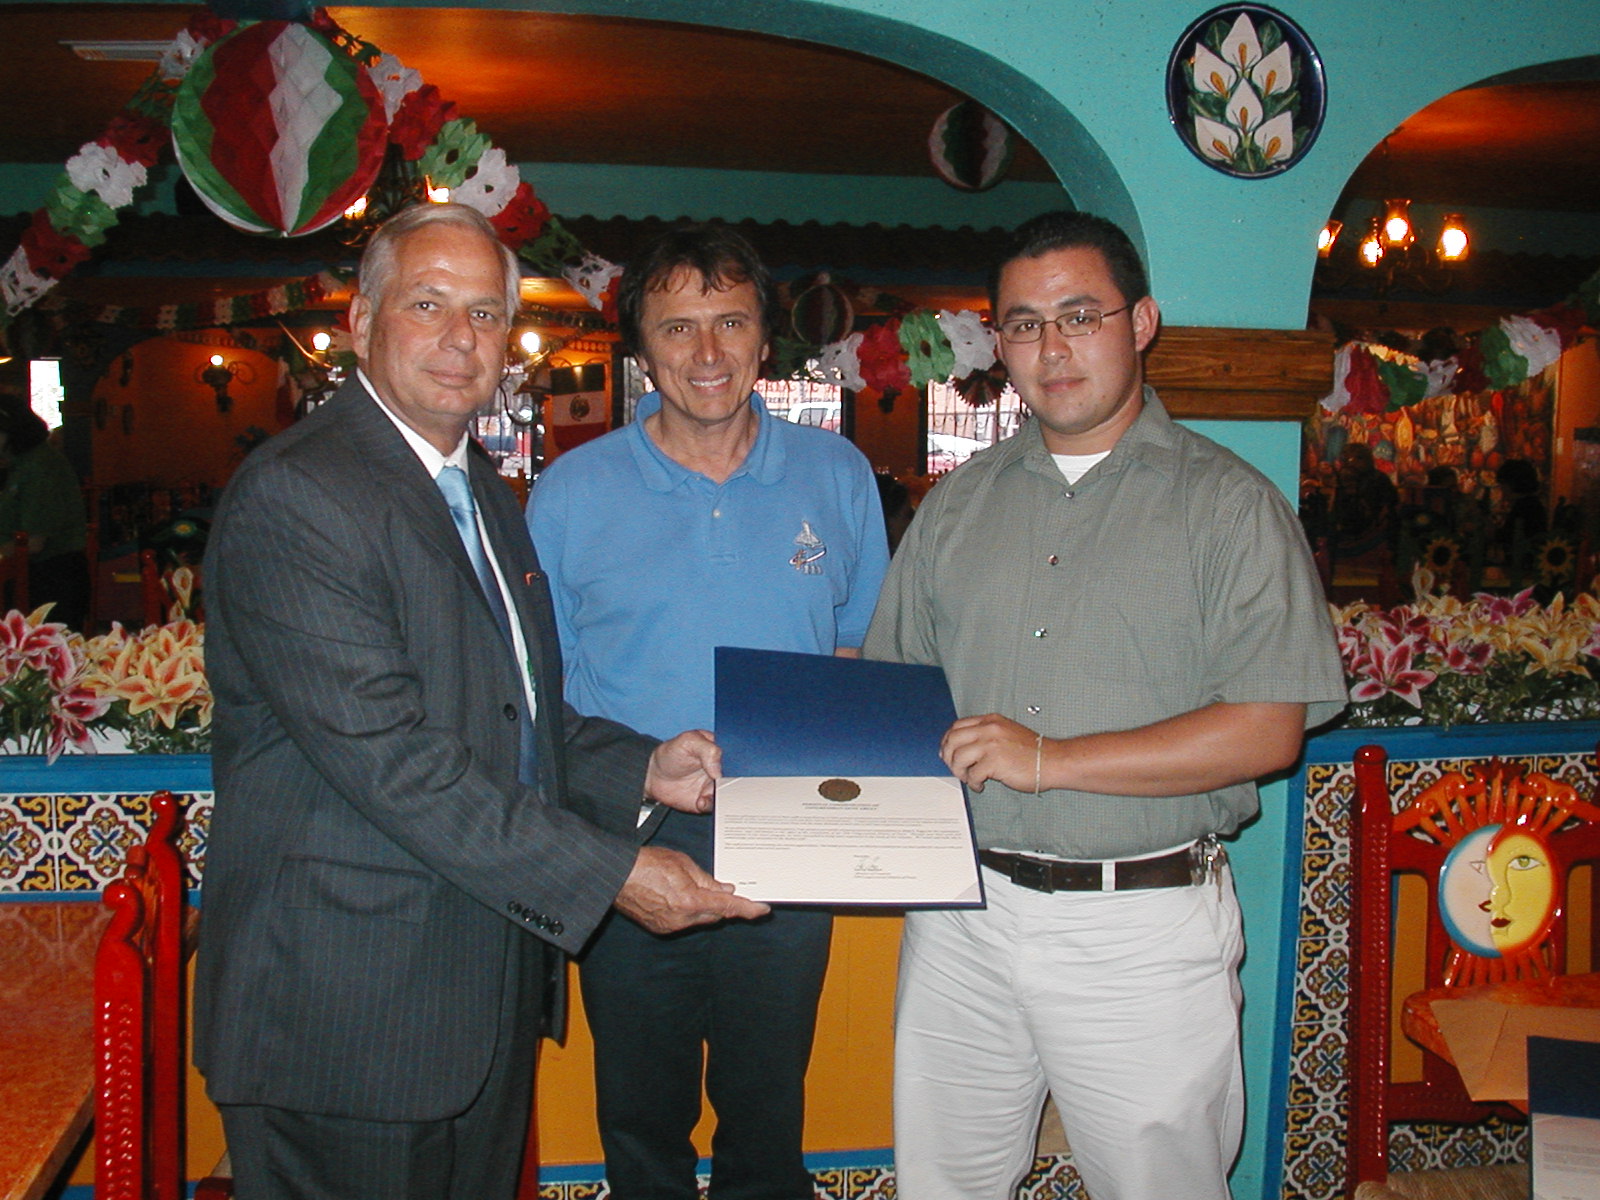 Jerry Lopez, District office intern receives Certificate of Appreciation from Rep. Green